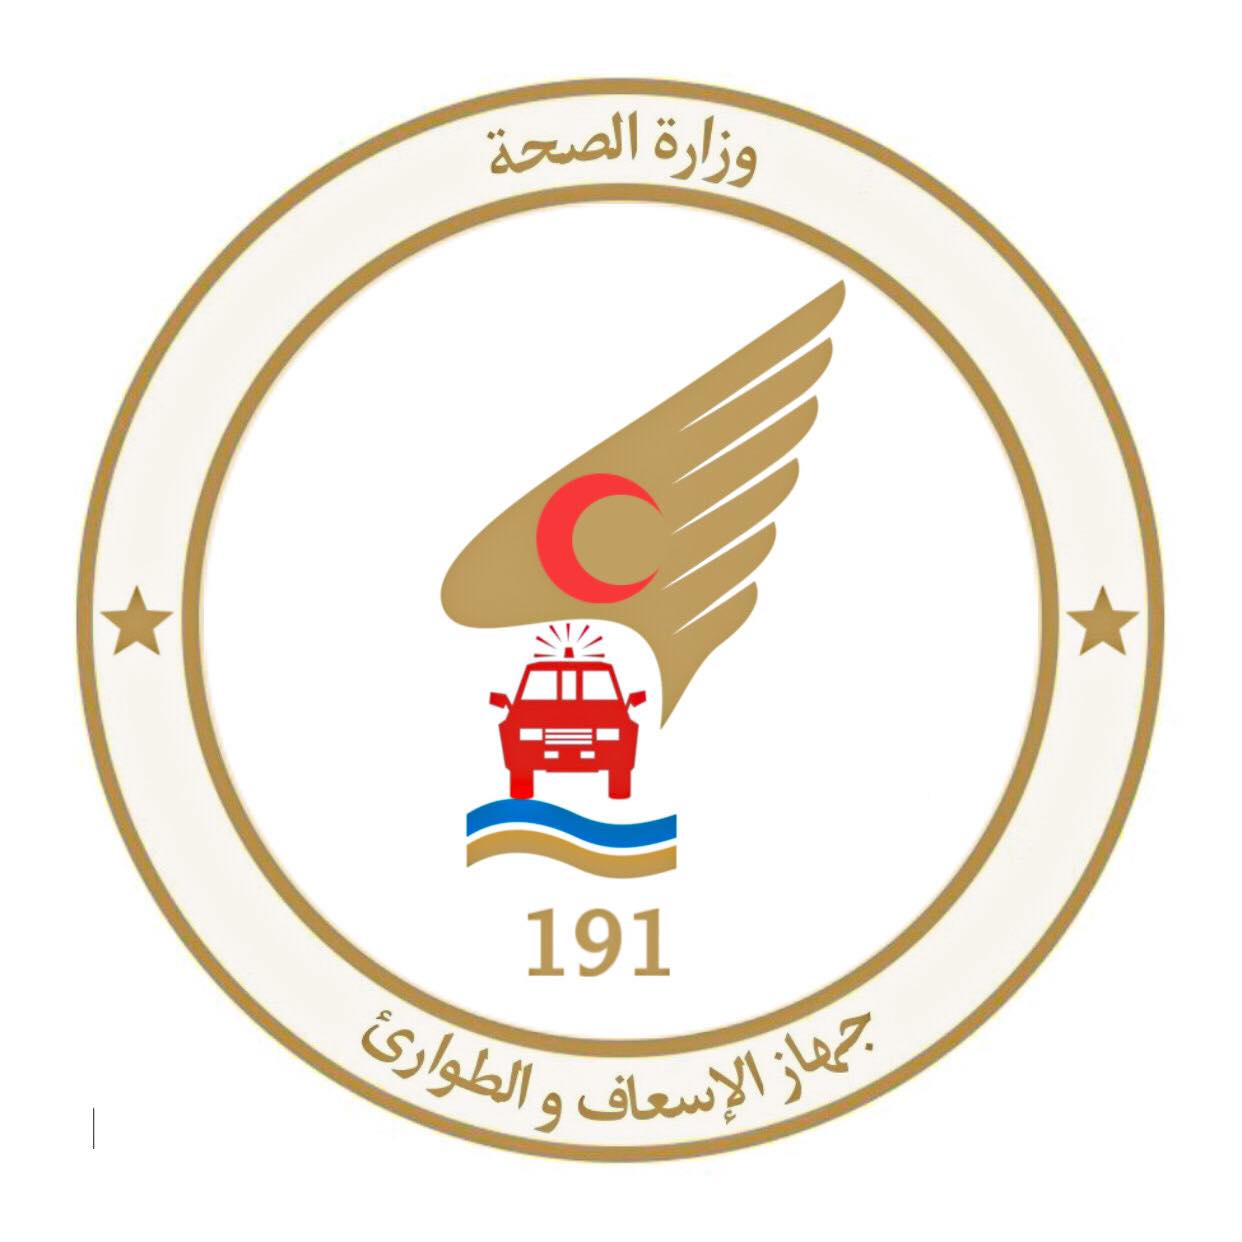 Ambulance and Emergency Services announces the death of one person and the injury of six others in the Al-Zawiya clashes.